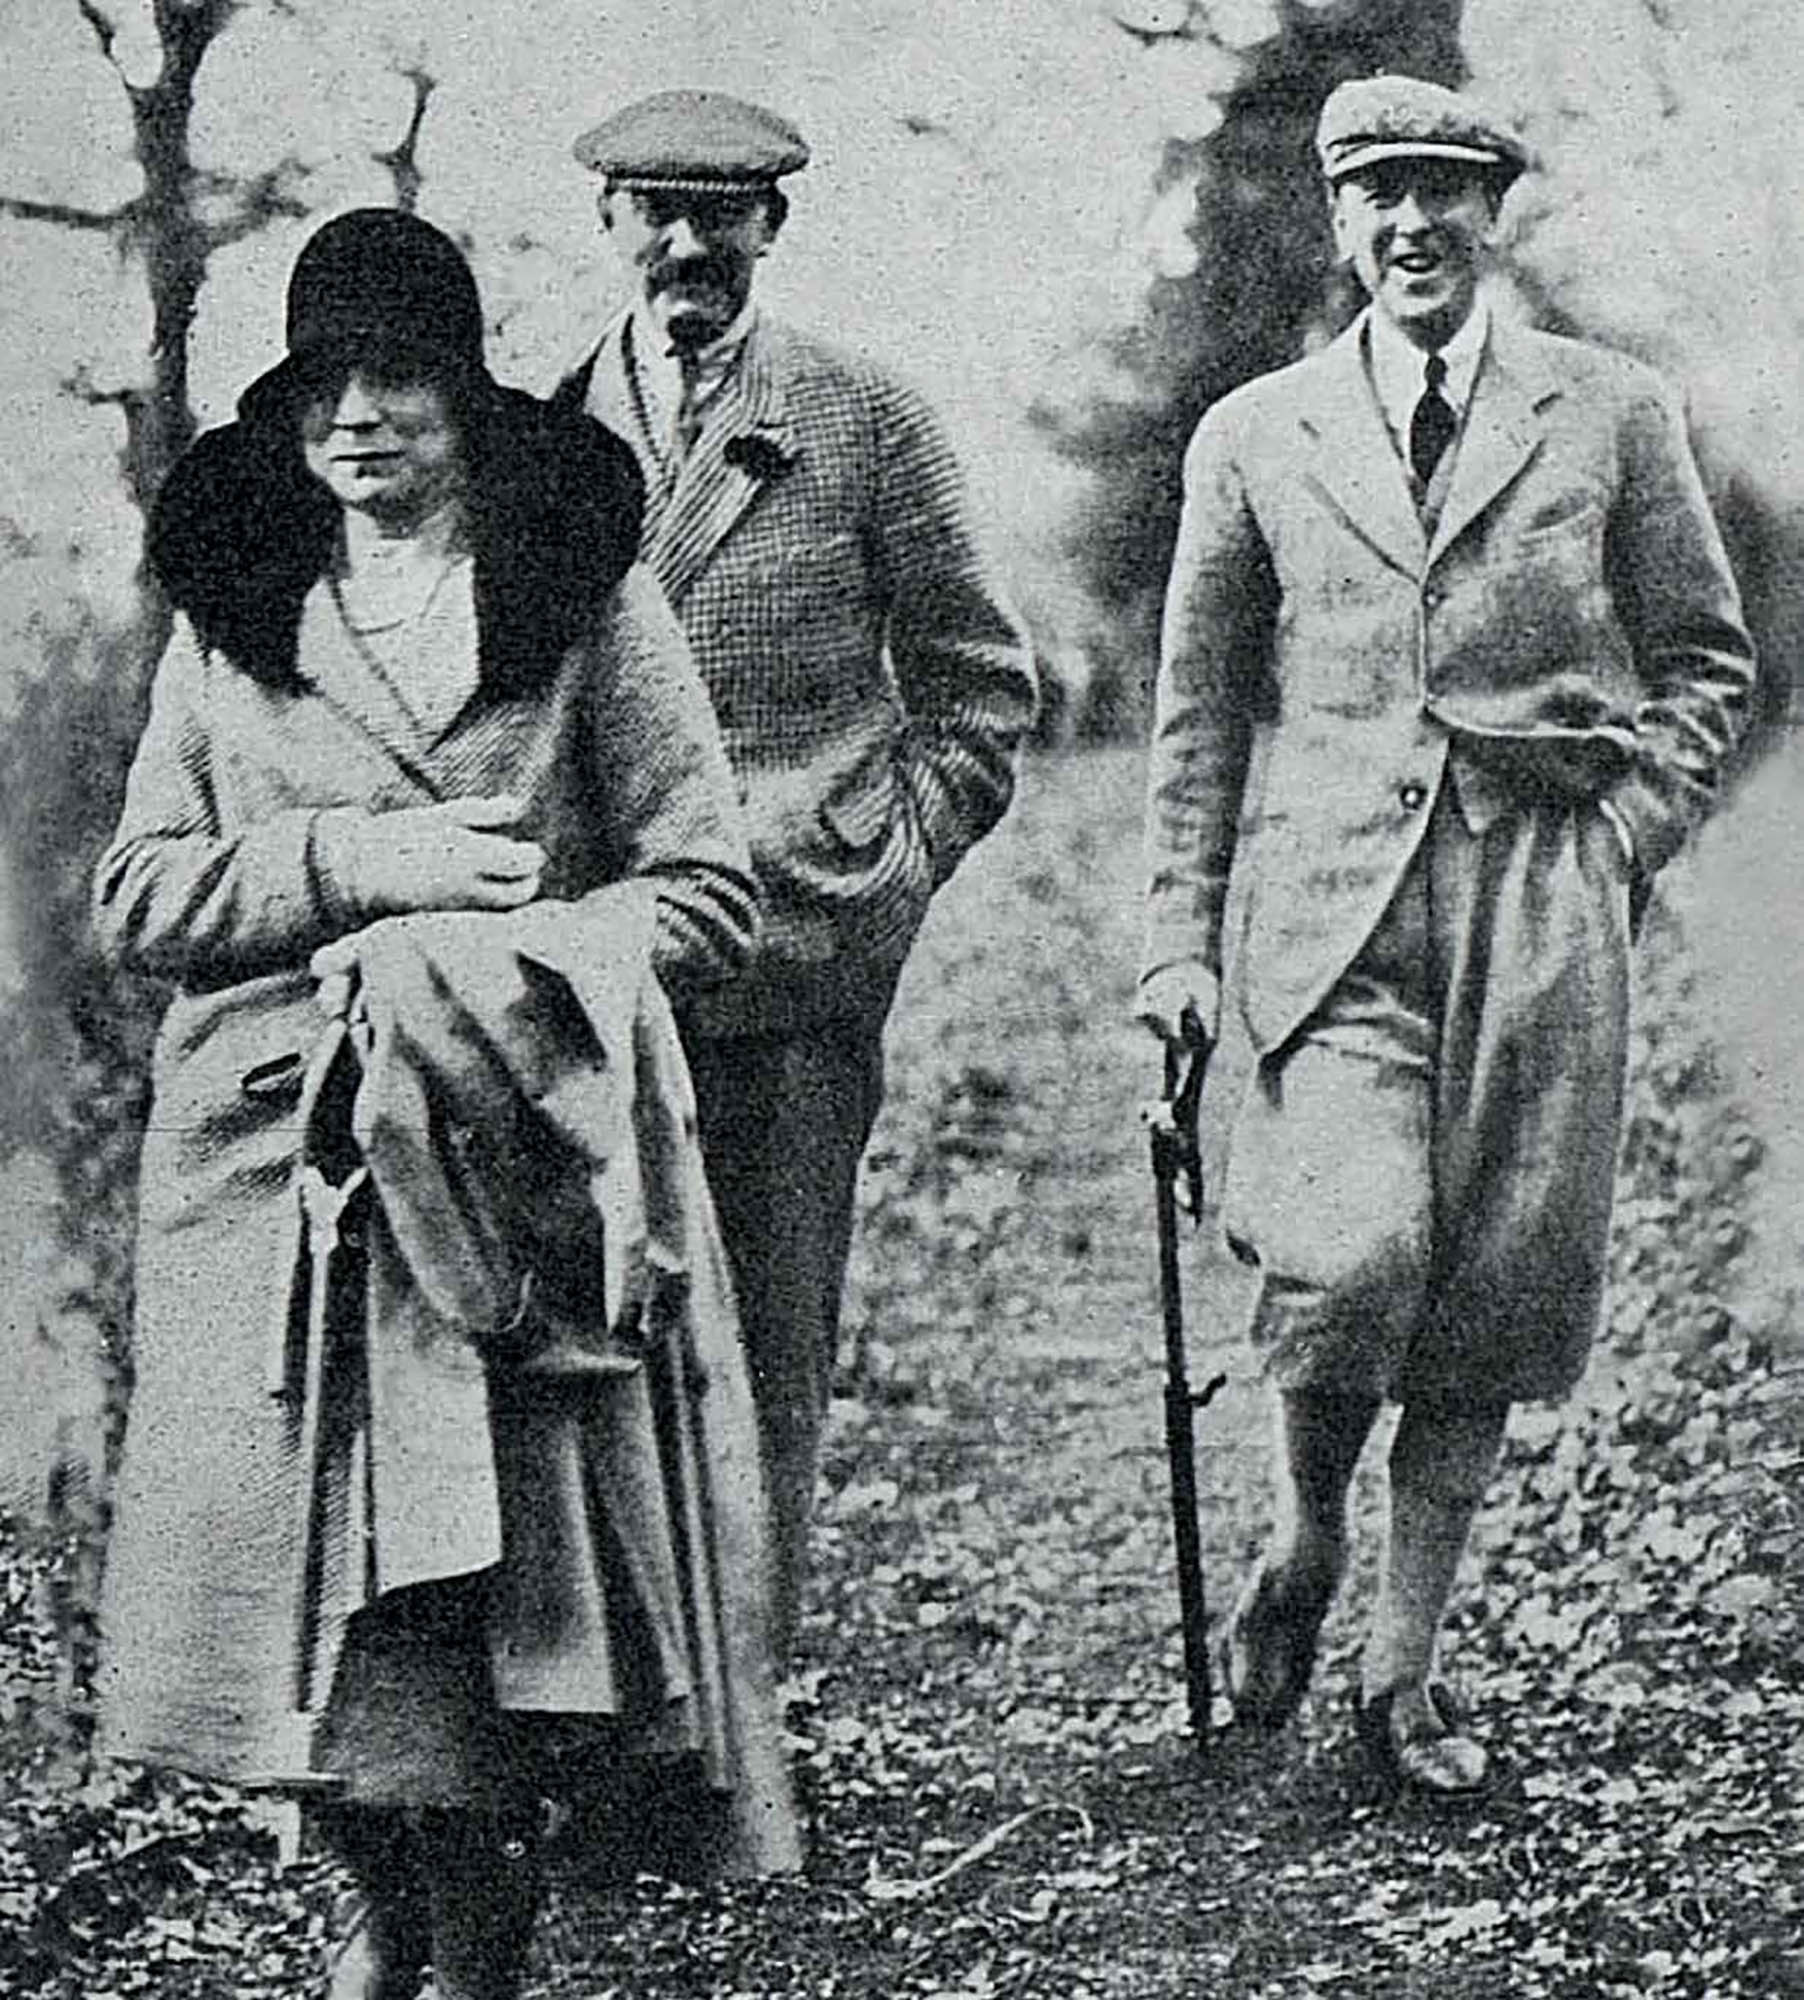 Commander Sir Bolton Eyres-Monsell, GBE, MP and Lady Eyres-Monsell with Colonel Wilfred Ashley, Broadlands, Romsey - The Tatler, 18th December 1929